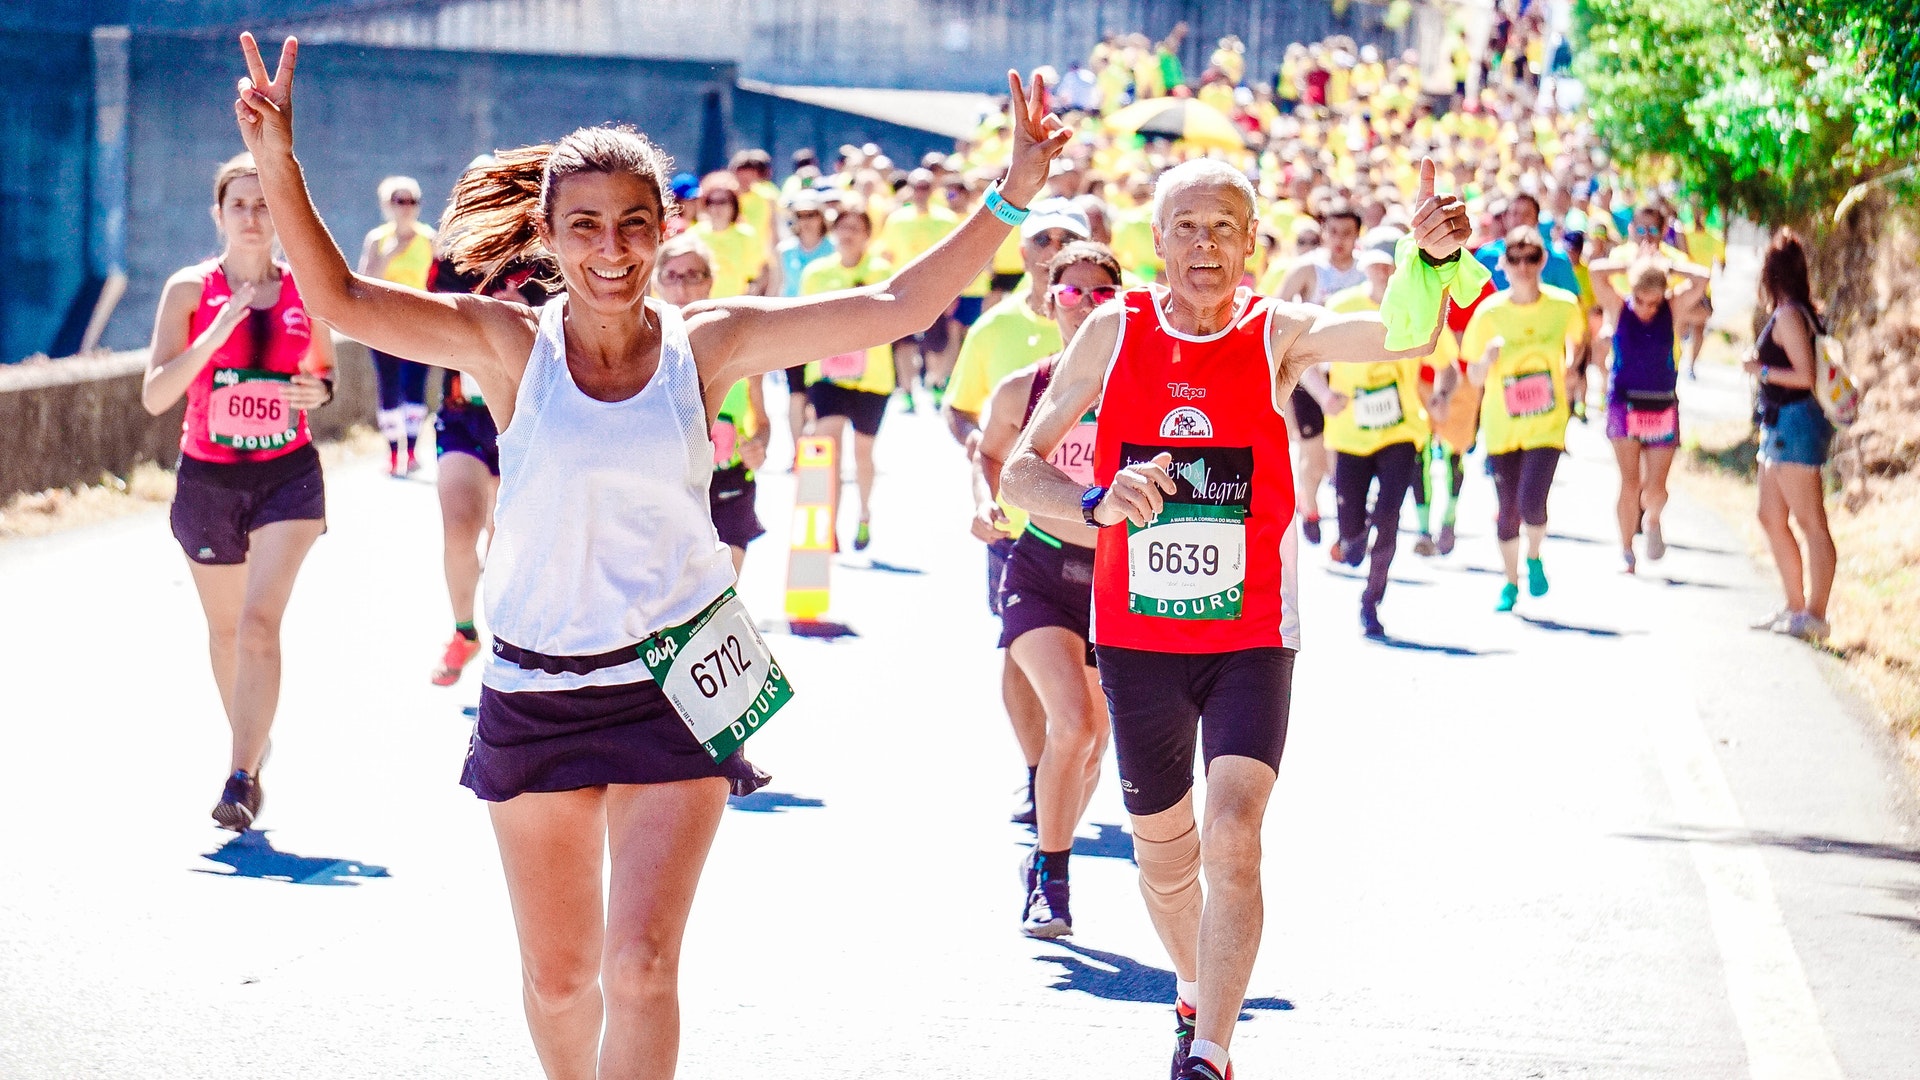 4 Tips For Running A Charity Fundraiser